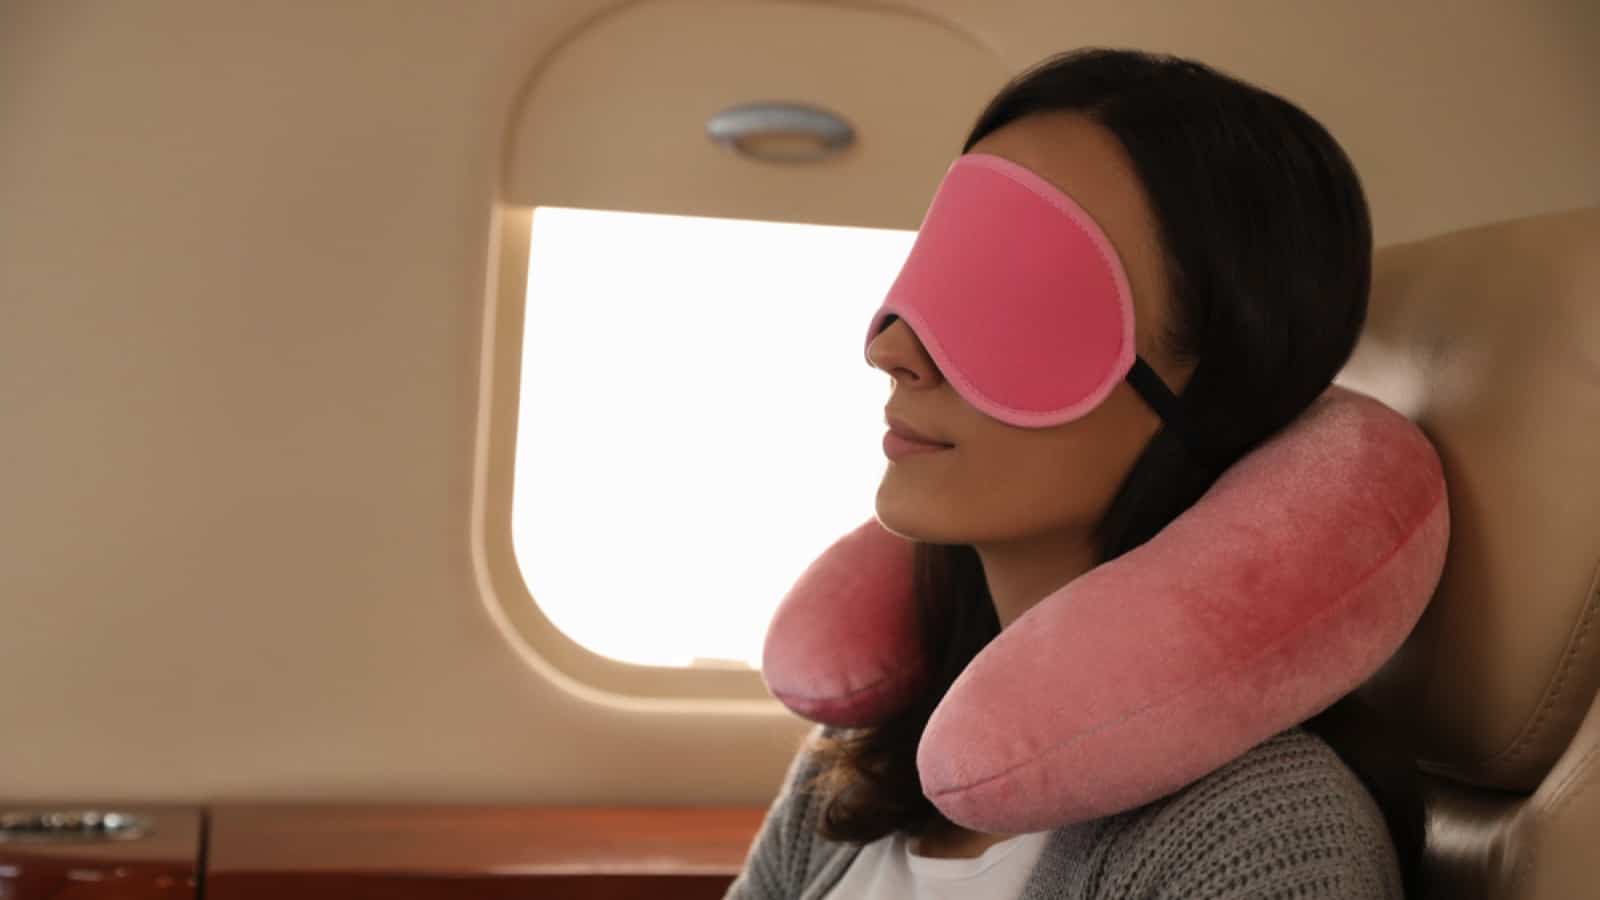 Sleeping with pillow in flight